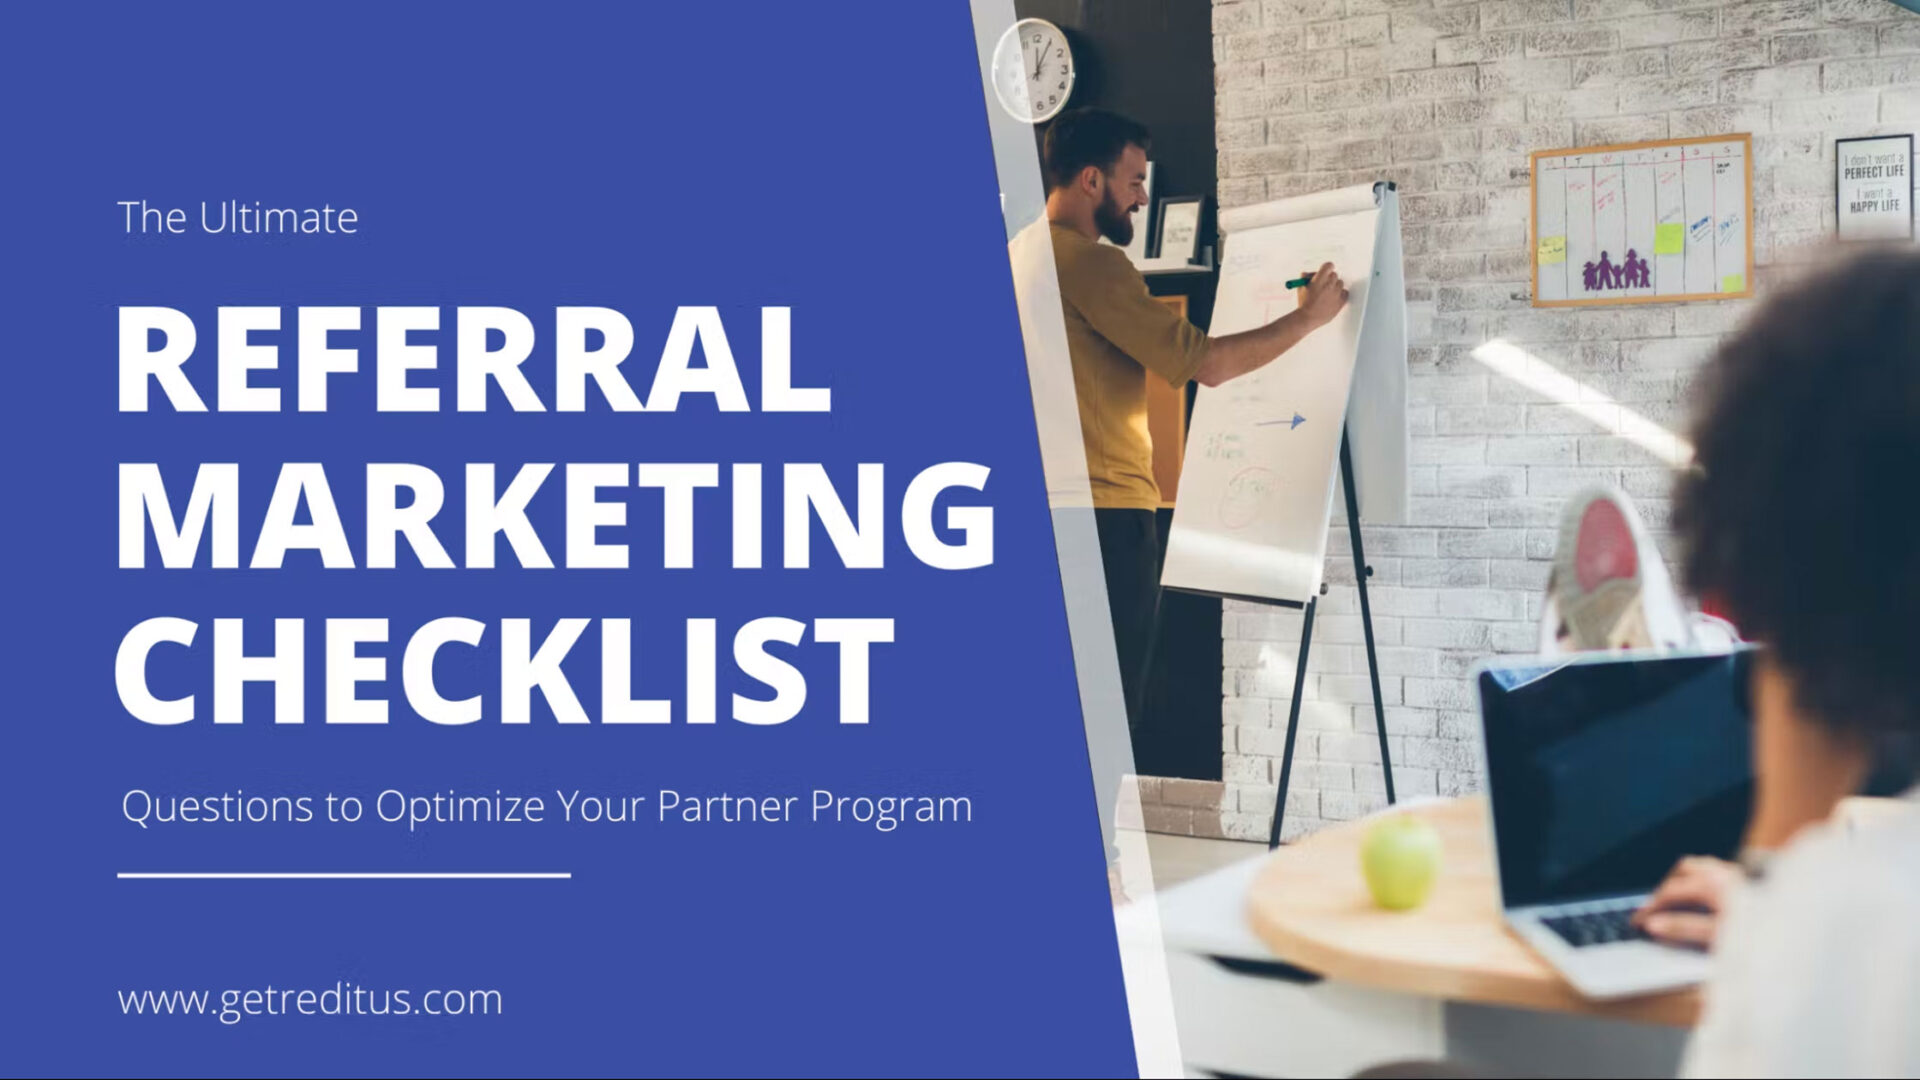 The Ultimate Referral Marketing Checklist for SaaS